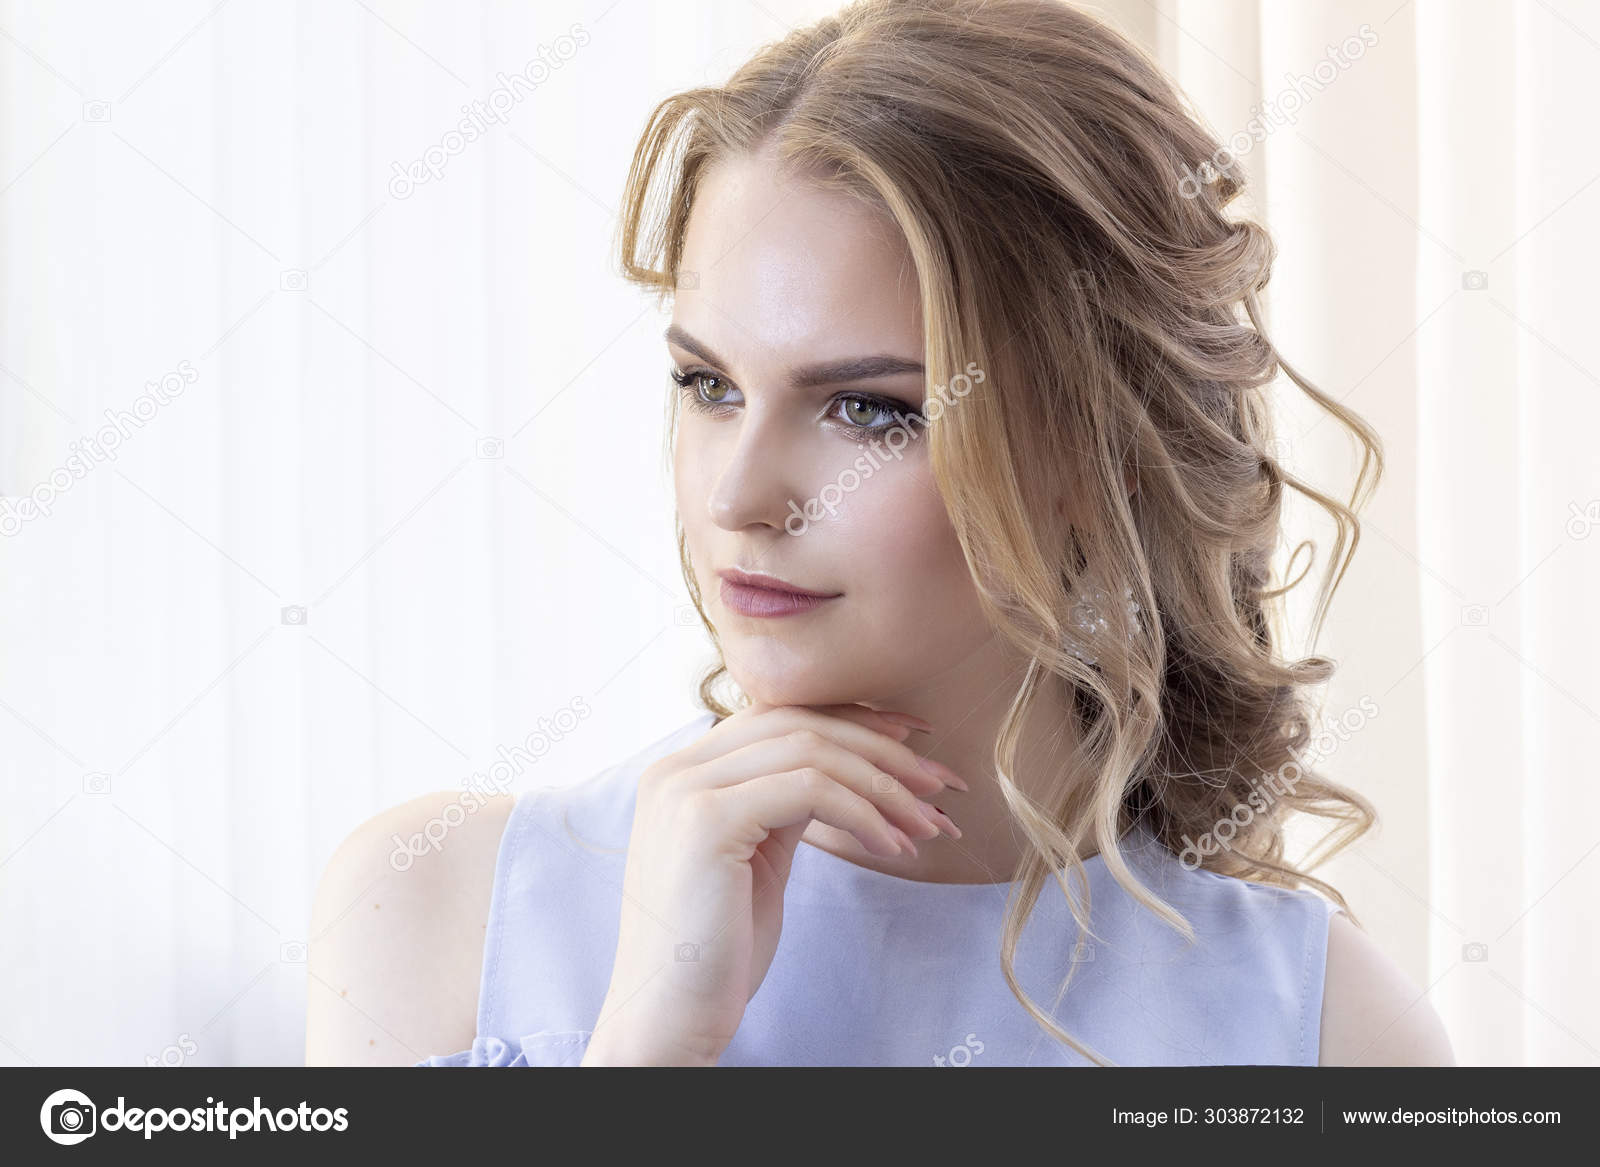 Beautiful Girl Wedding Hairstyle Looks Herself Mirror Portrait Young Girl  Stock Photo by © 303872132